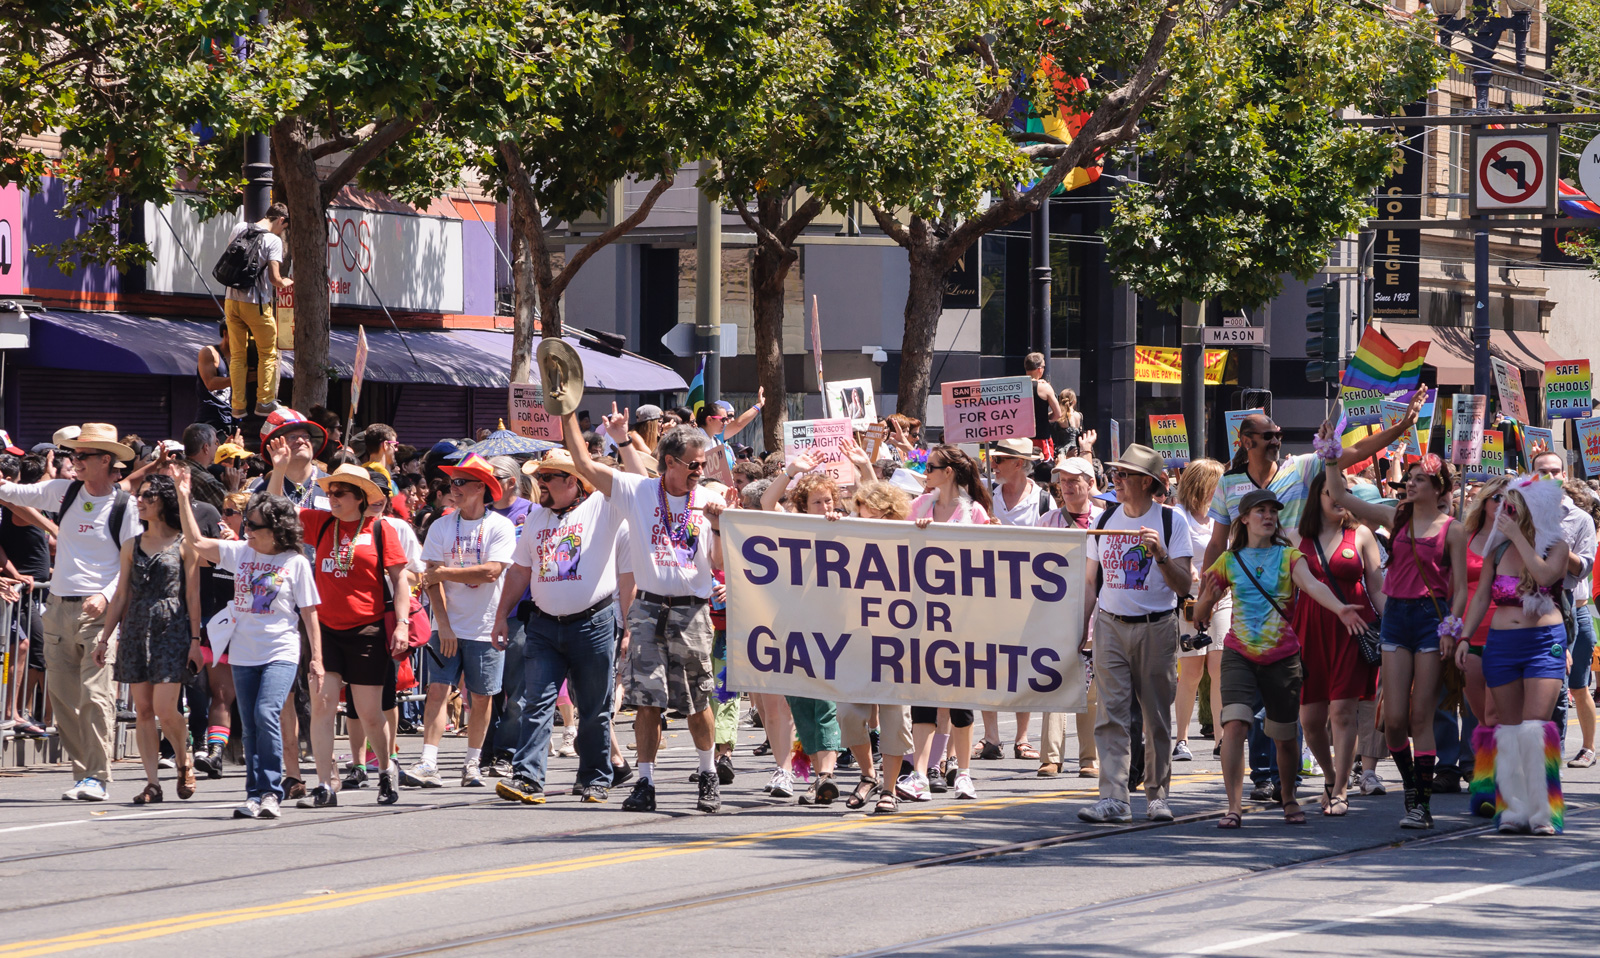 Heterosexual supporters of gay rights marching in San Francisco Pride with a banner.